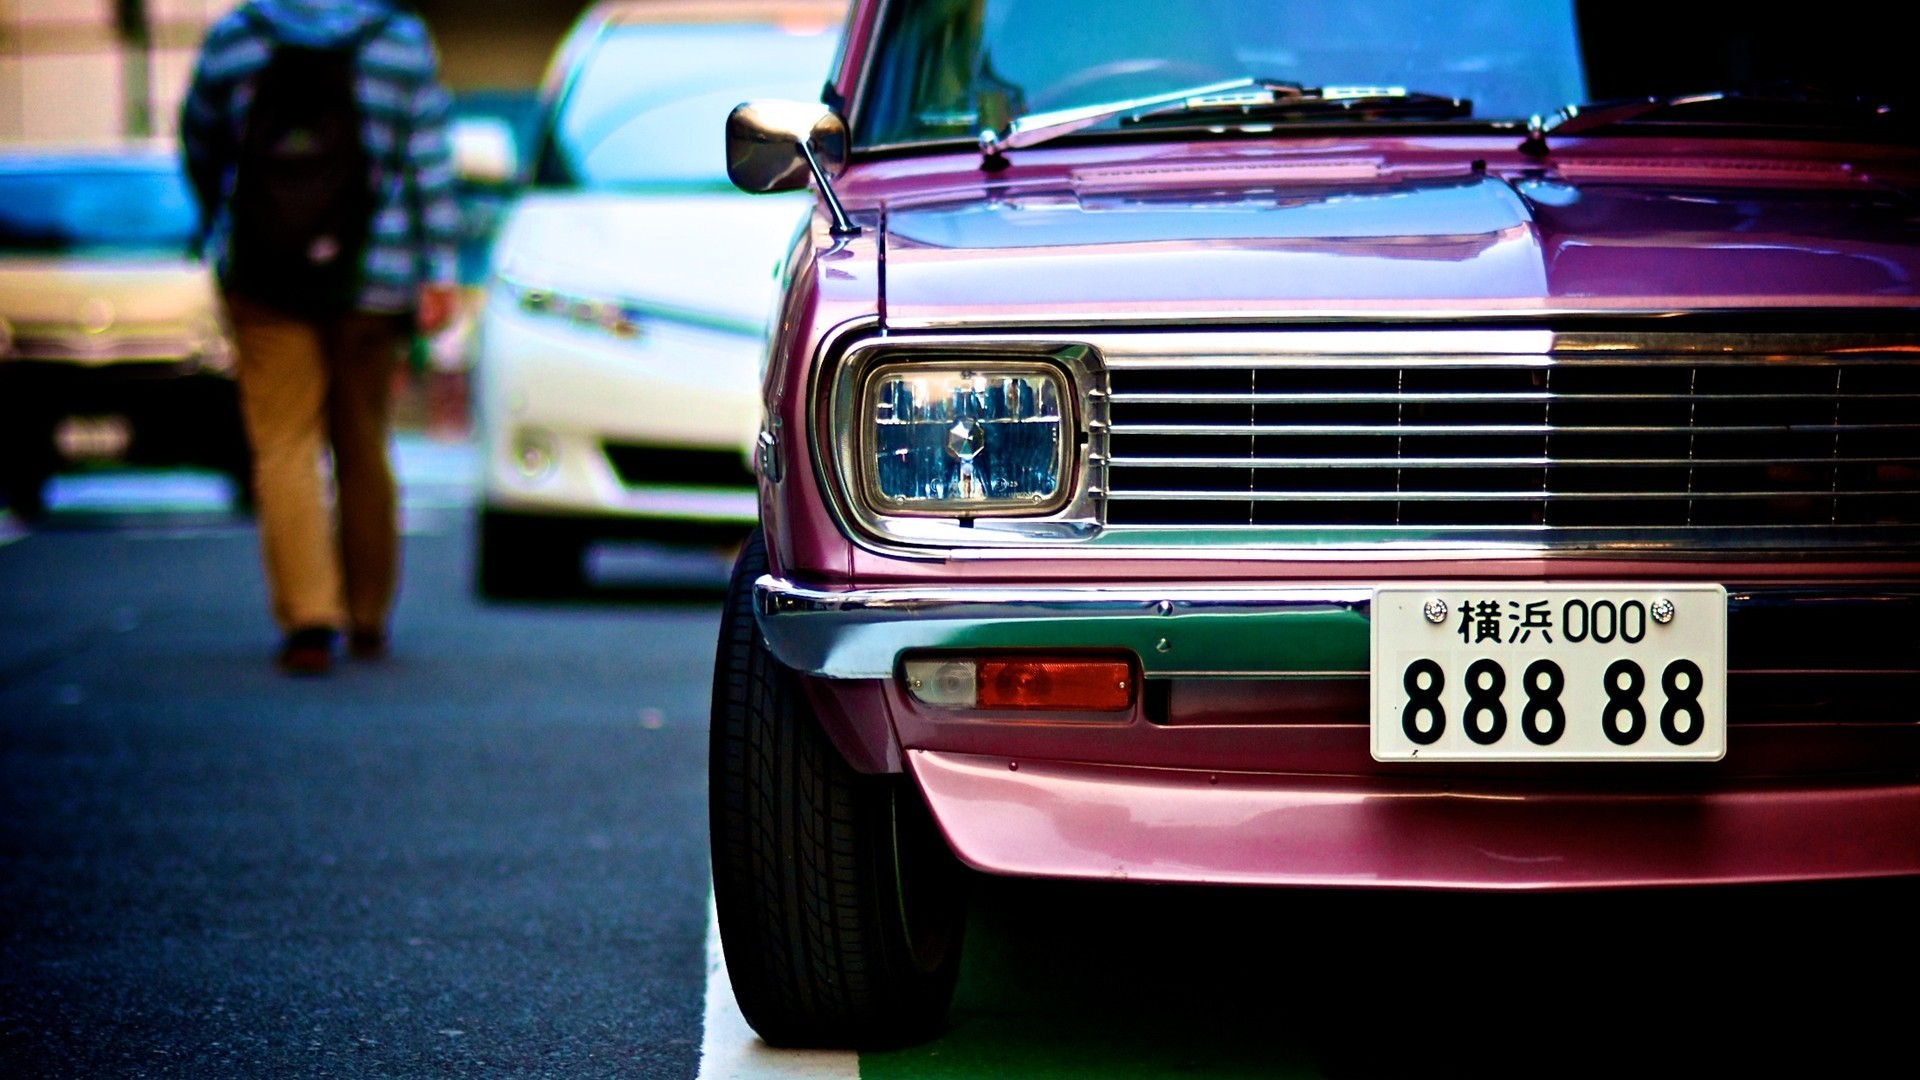 Car Datsun Numbers Vehicle Asia Pink Cars 1920x1080